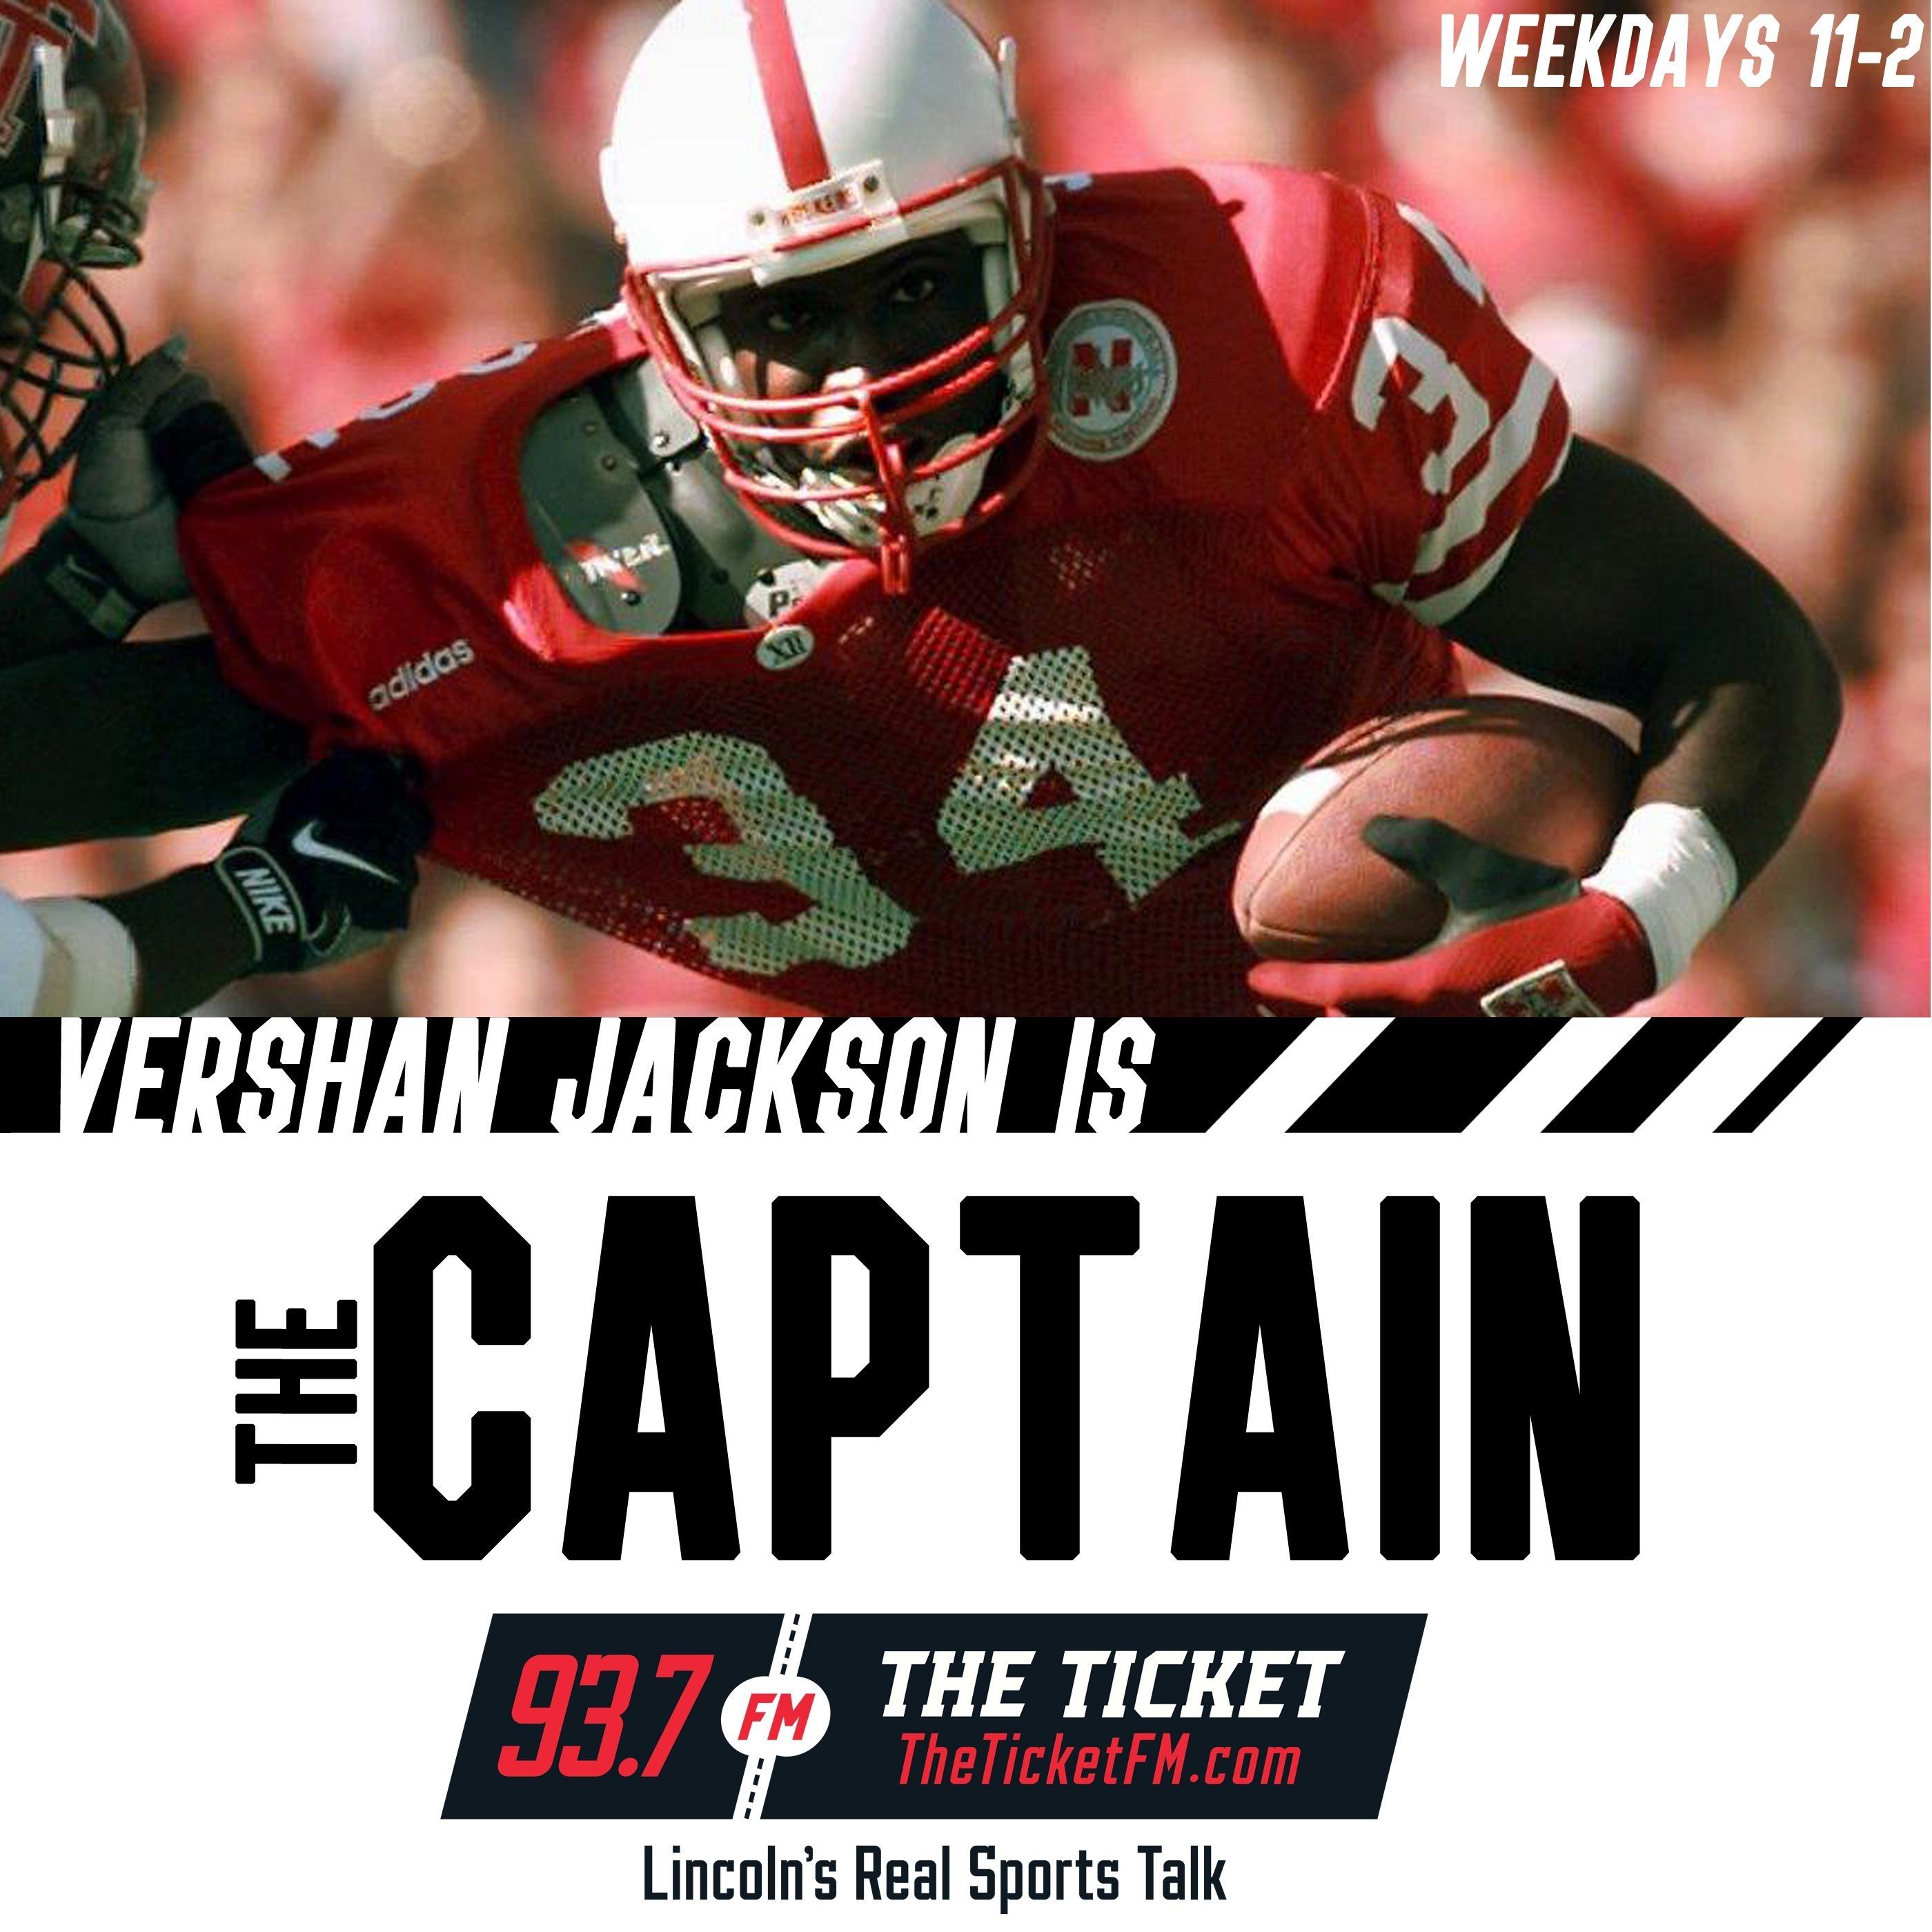 The Captain w/ Vershan Jackson and Terrell Farley – 93.7 The Ticket KNTK